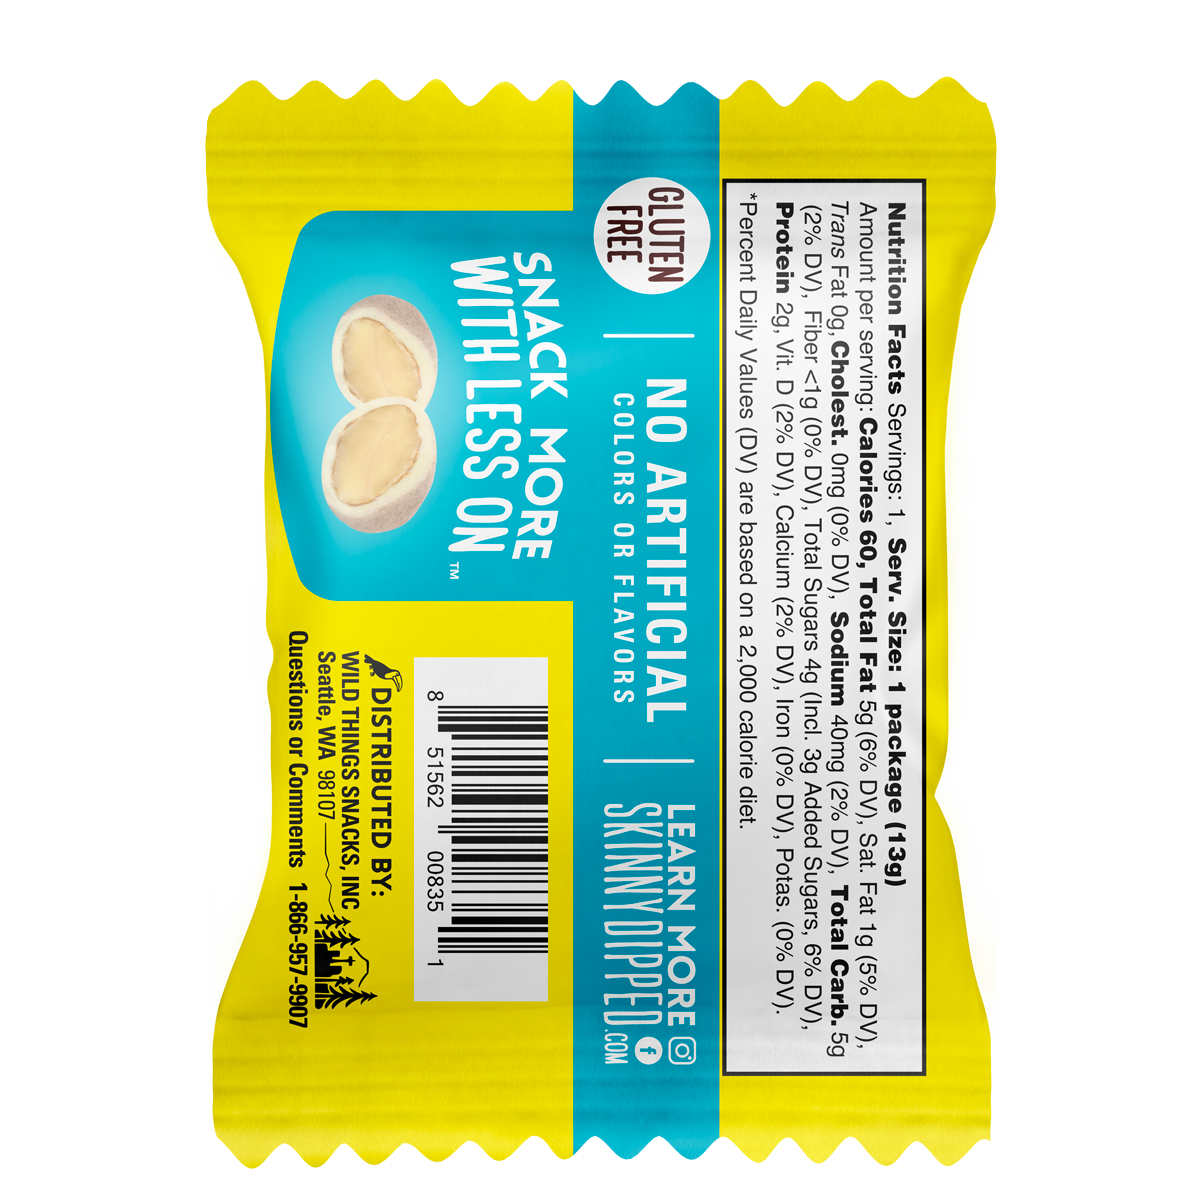 0.46 oz--SkinnyDipped Lemon Bliss Almonds back of a single bag showing the nutrition facts.